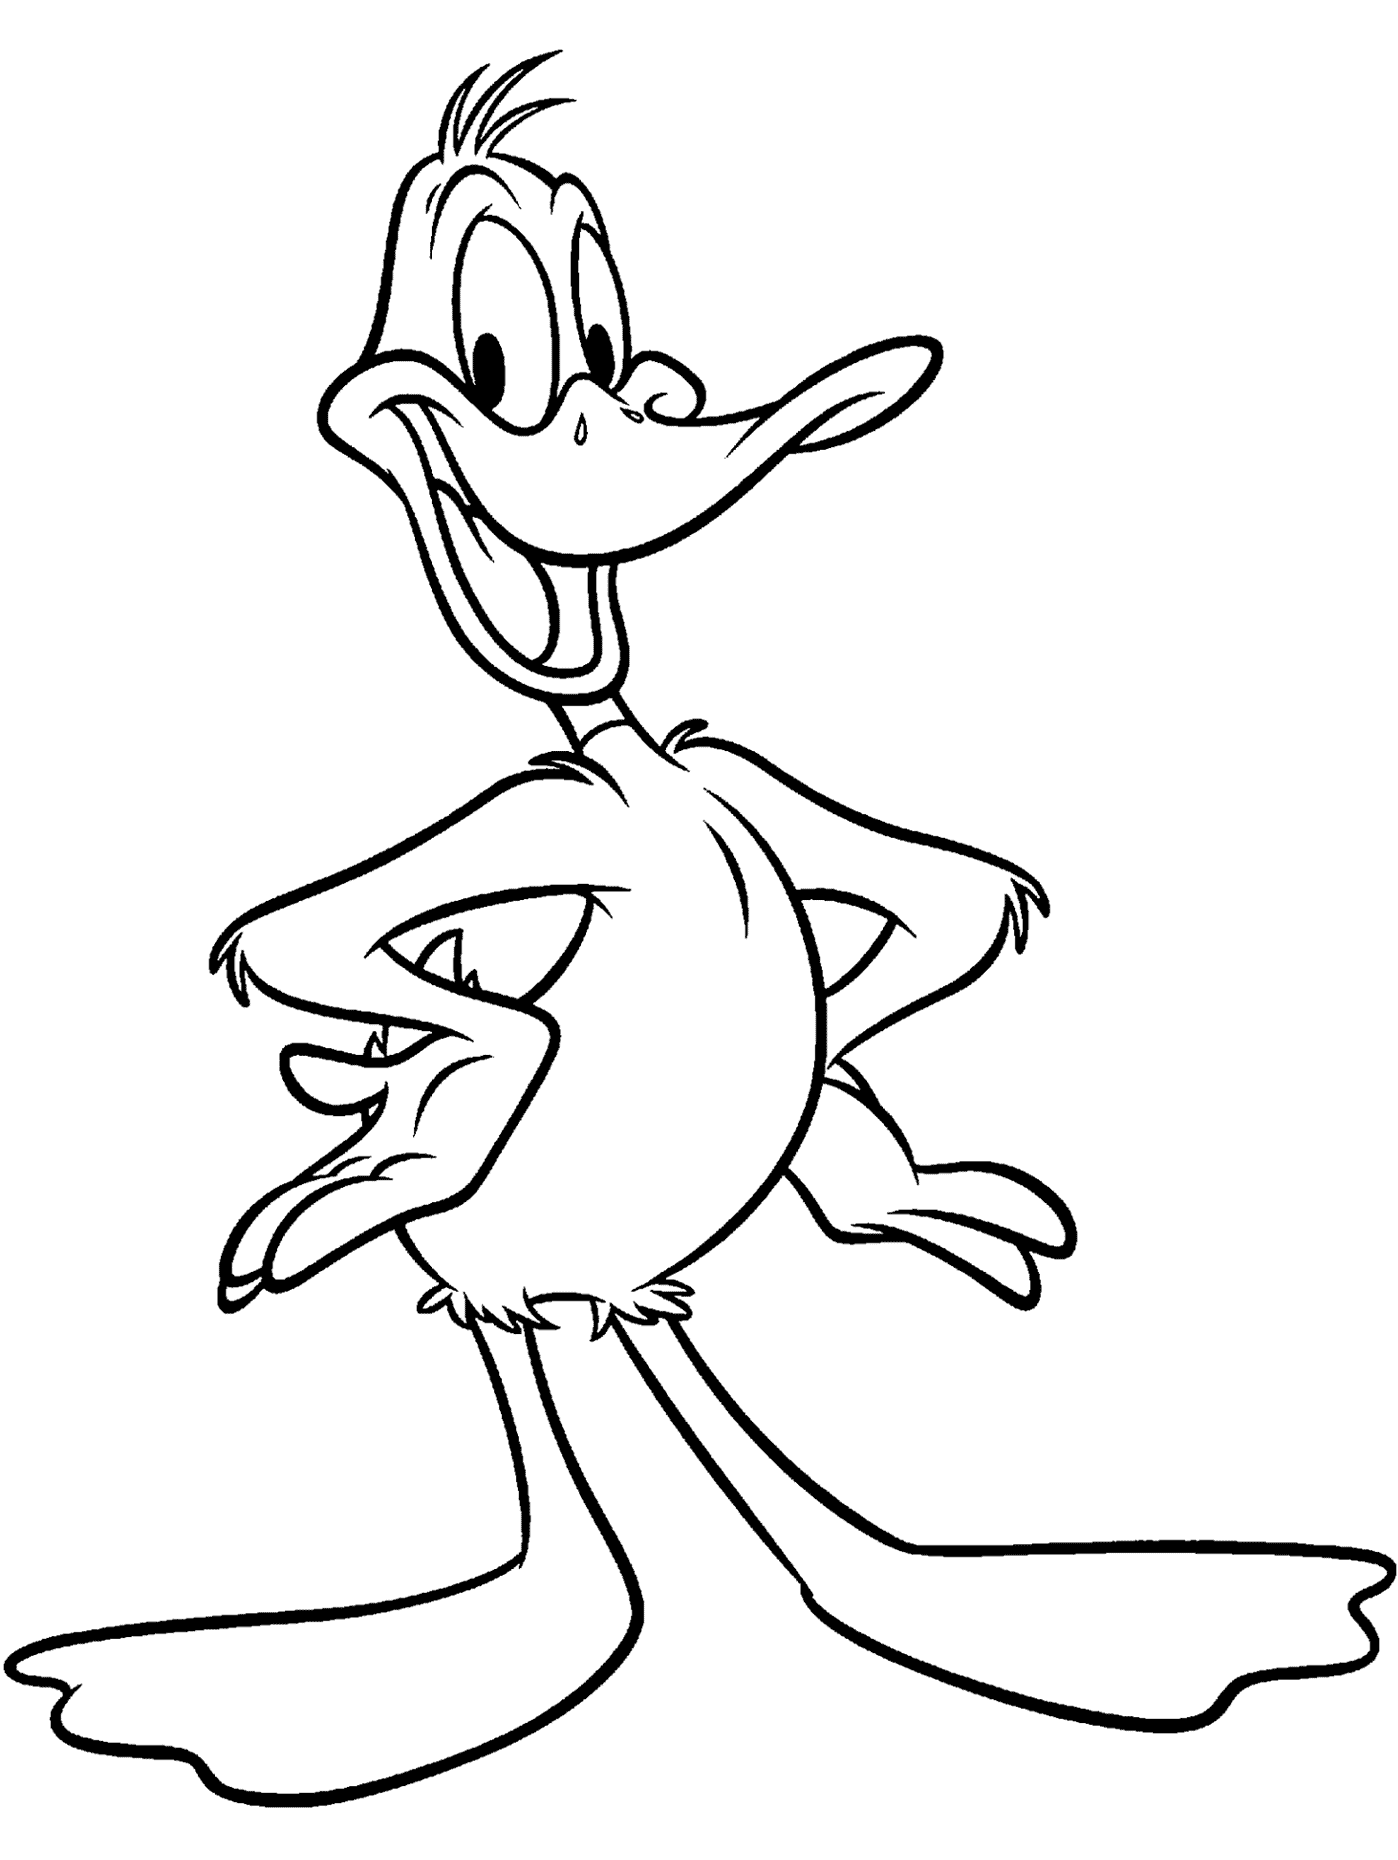 looney toon coloring pages 17 best images about looney tunes characters coloring looney pages coloring toon 